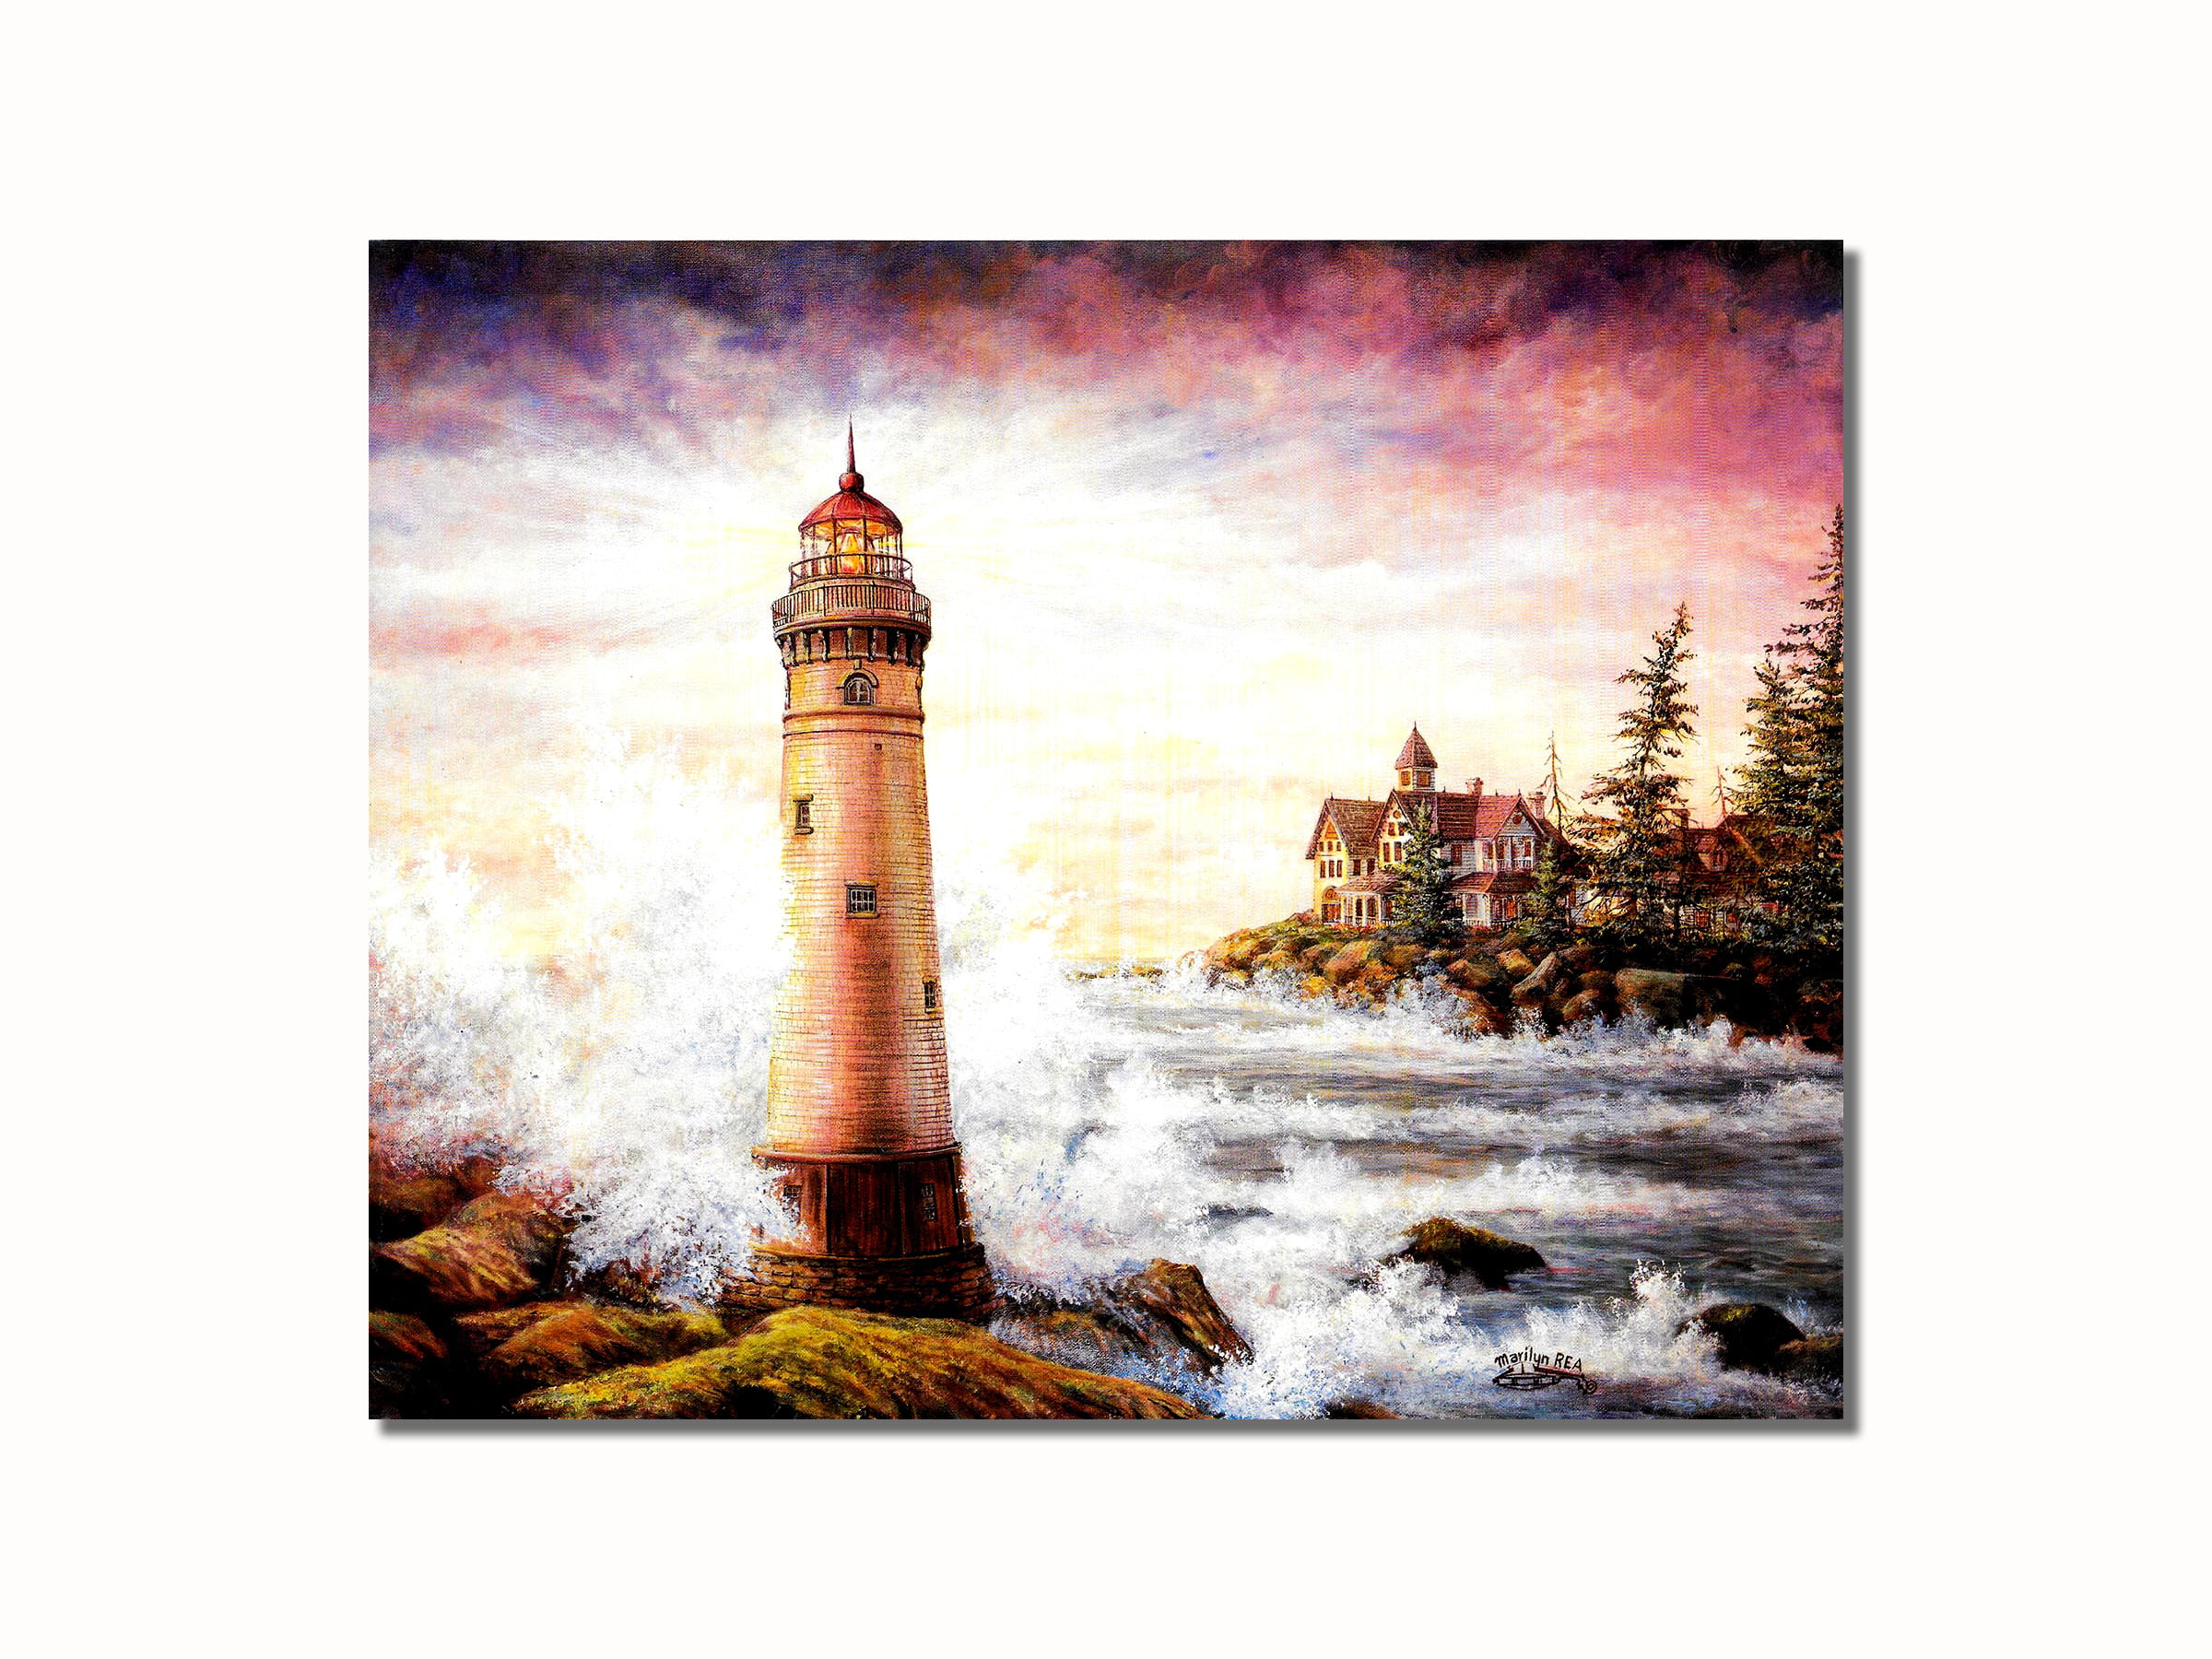 Luminescense Lighthouse in the Storm Wall Picture 8x10 Art Print 